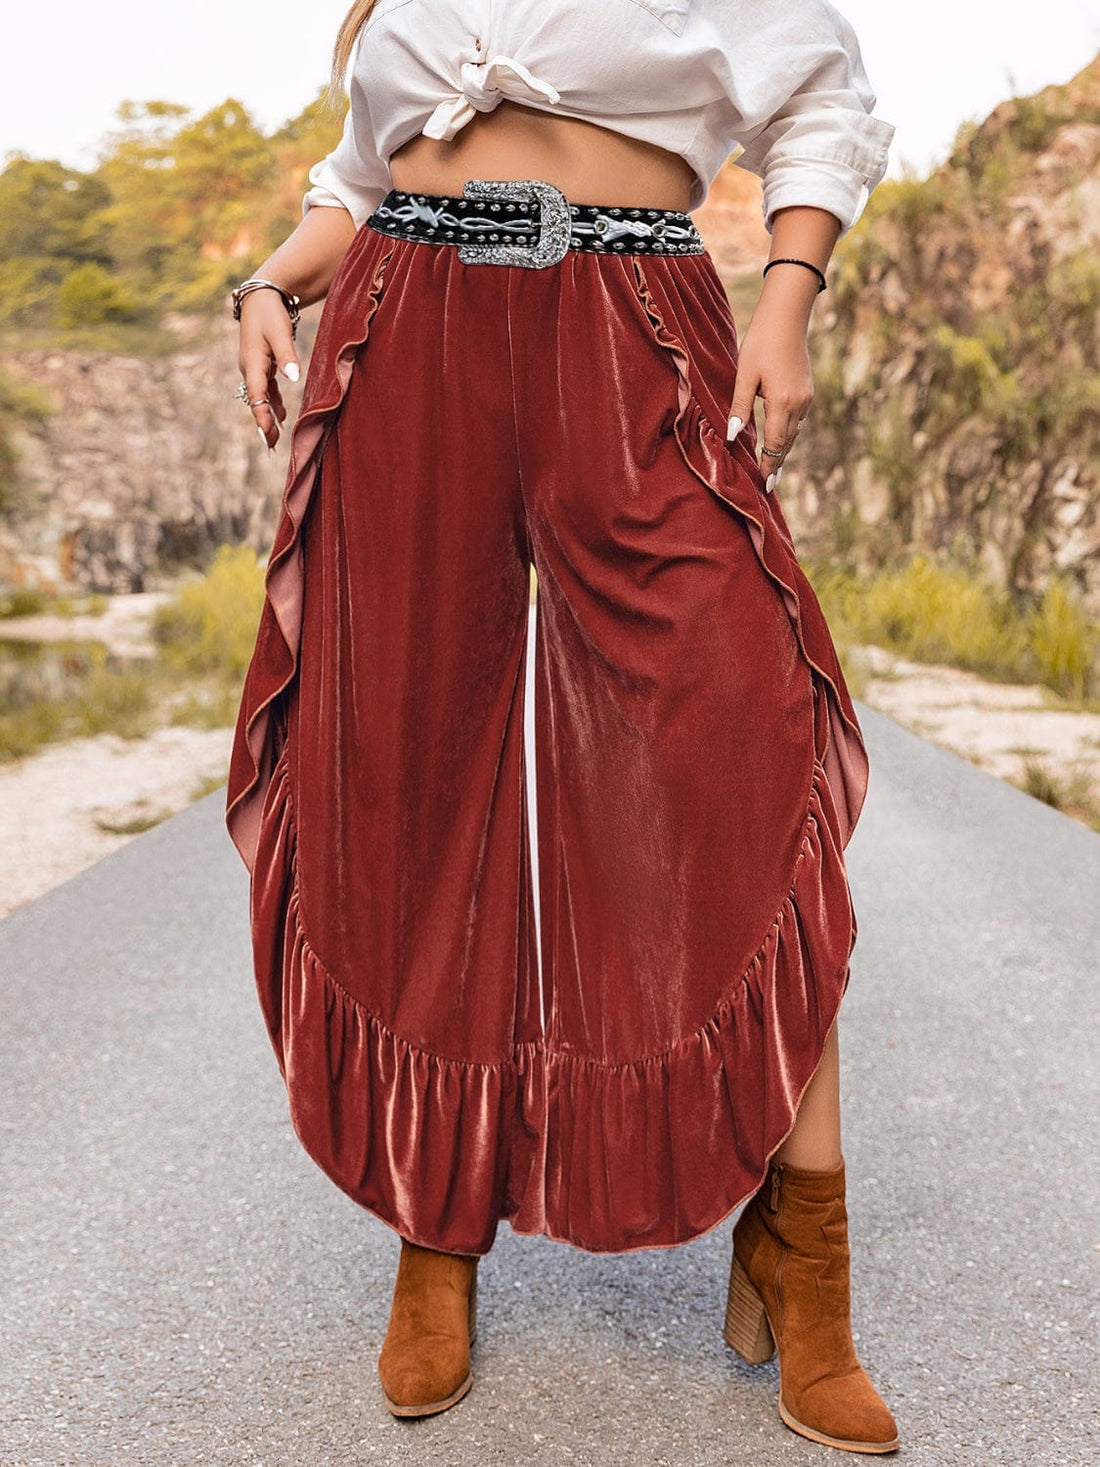 "Image: A model wearing Unique Kulture Plus Size Ruffled Slit Pants. The pants are a stylish and trendy addition to plus-size fashion, featuring a high waist with ruffled detailing and a thigh-high slit on one leg. The design is both flattering and fashionable, perfect for a confident and chic look."